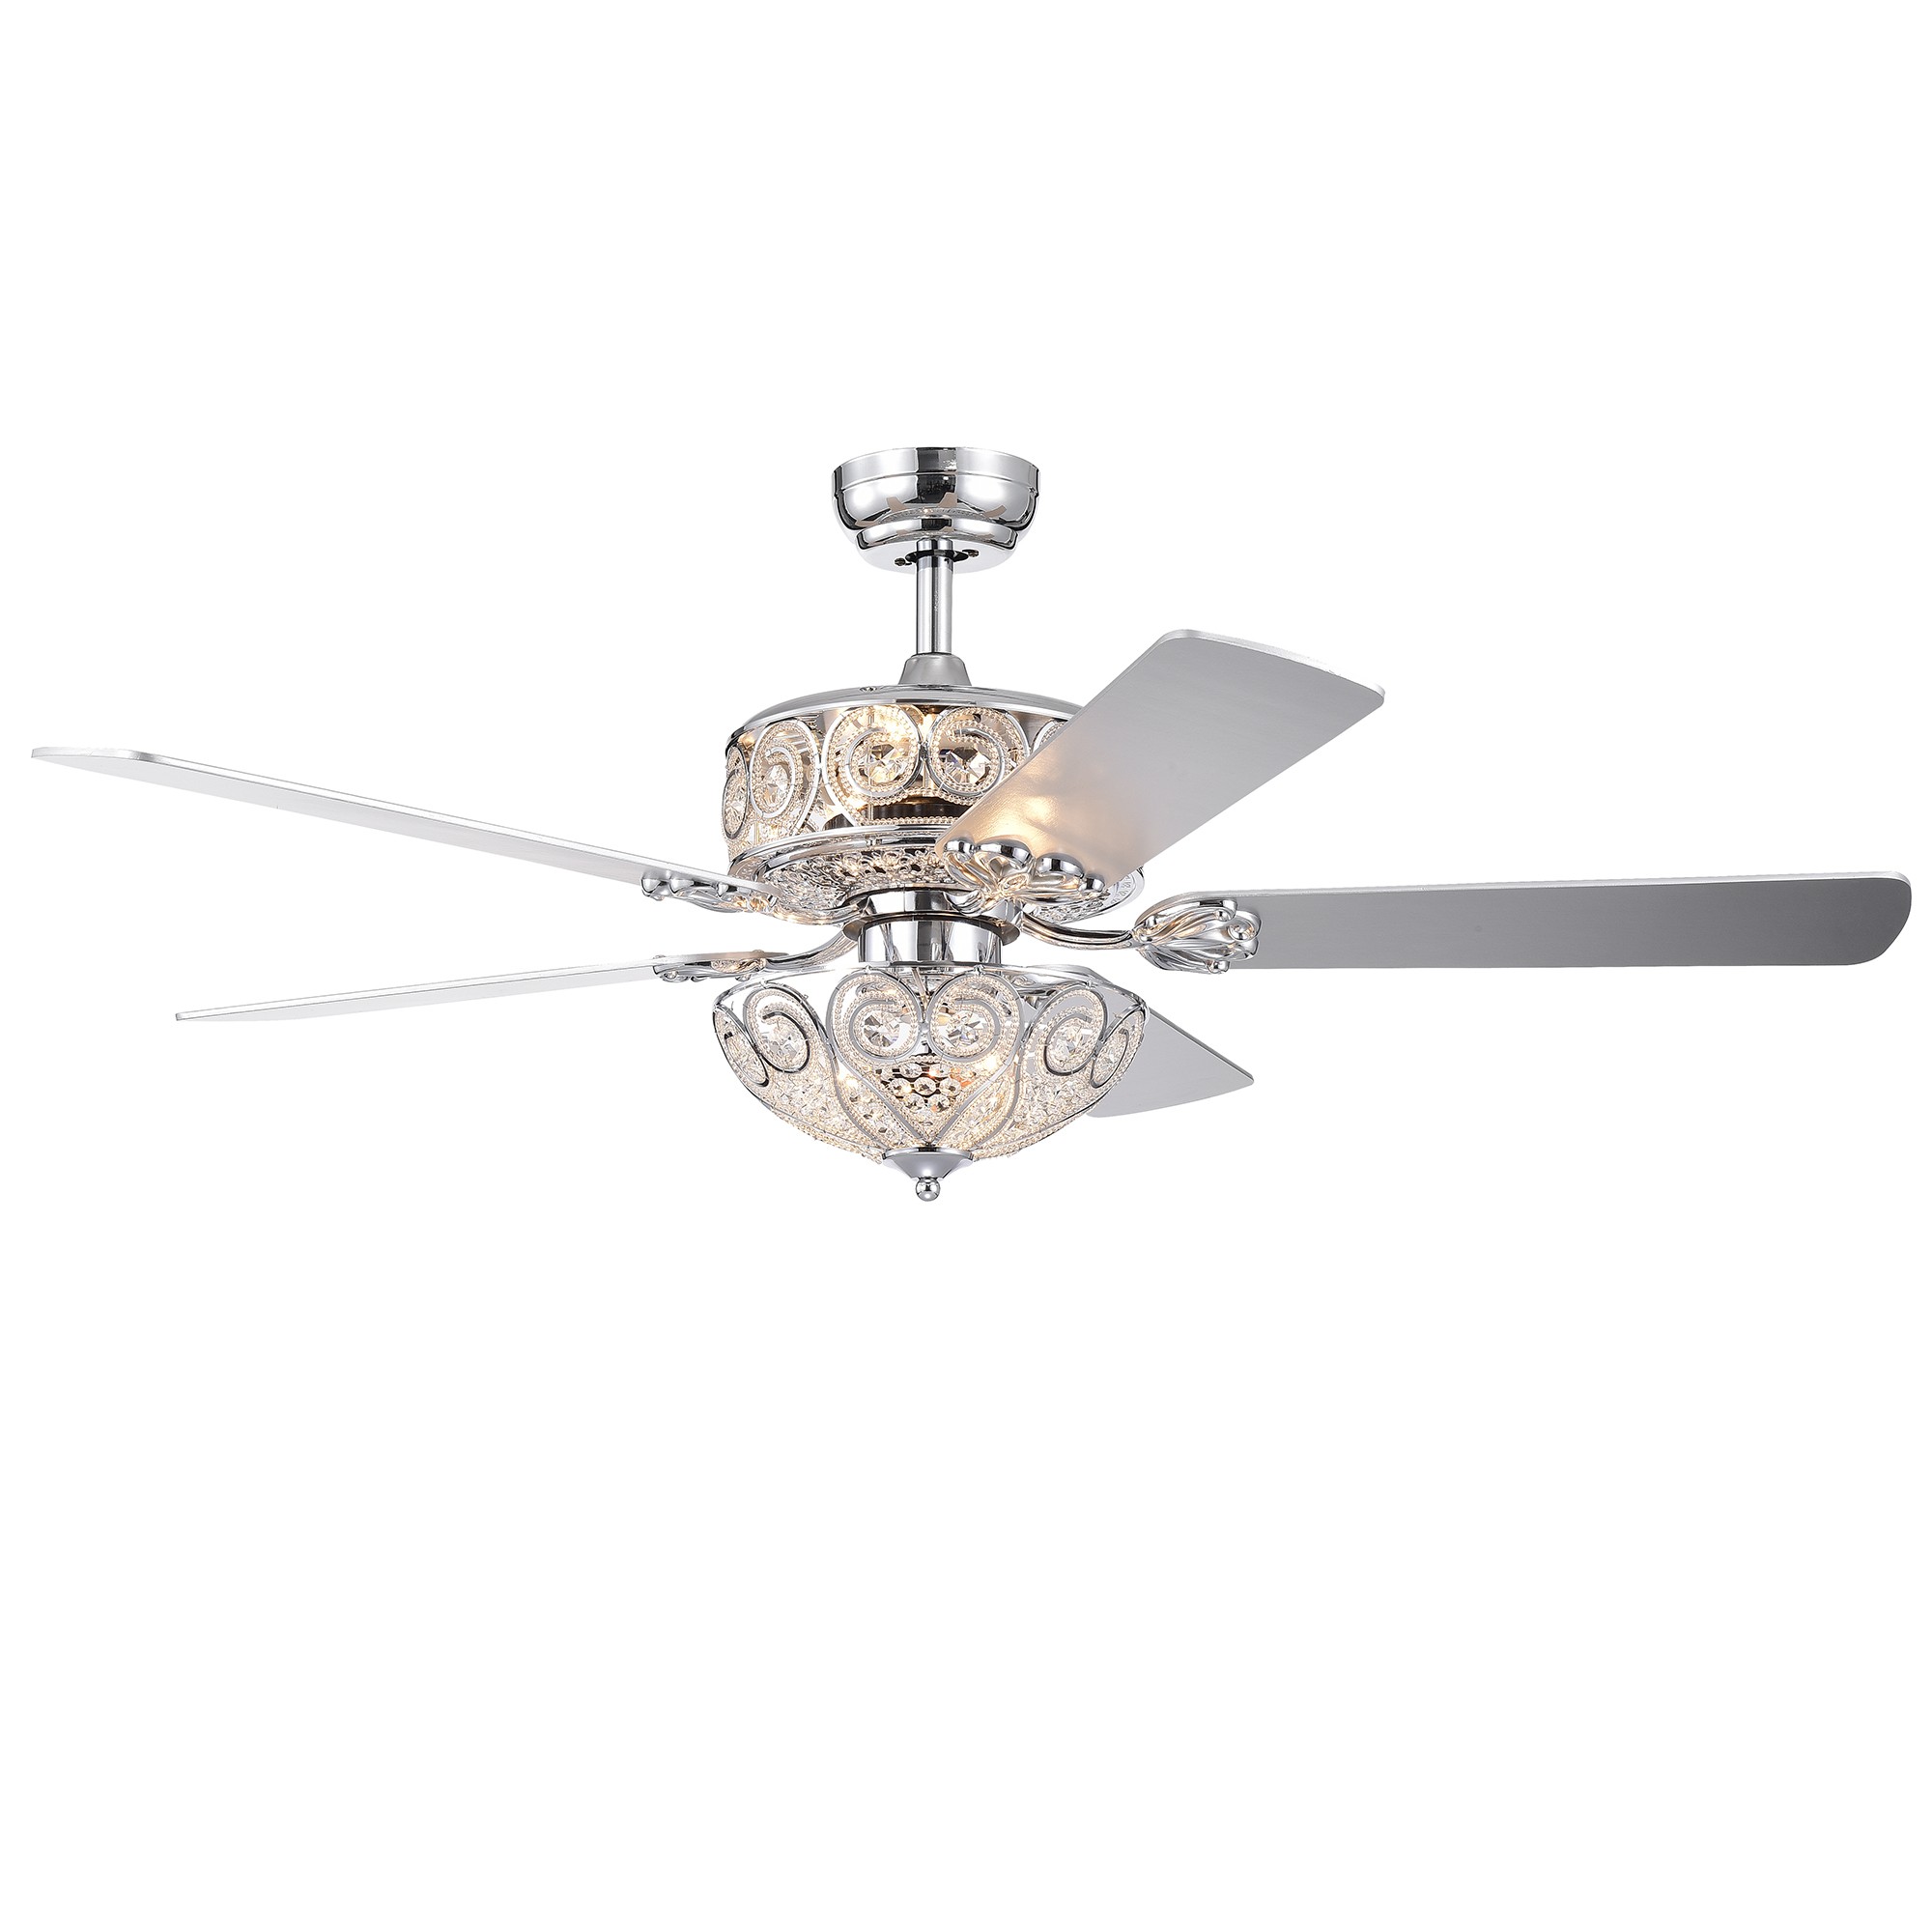 Catalina Chrome 5-blade 52-inch Crystal Ceiling Fan